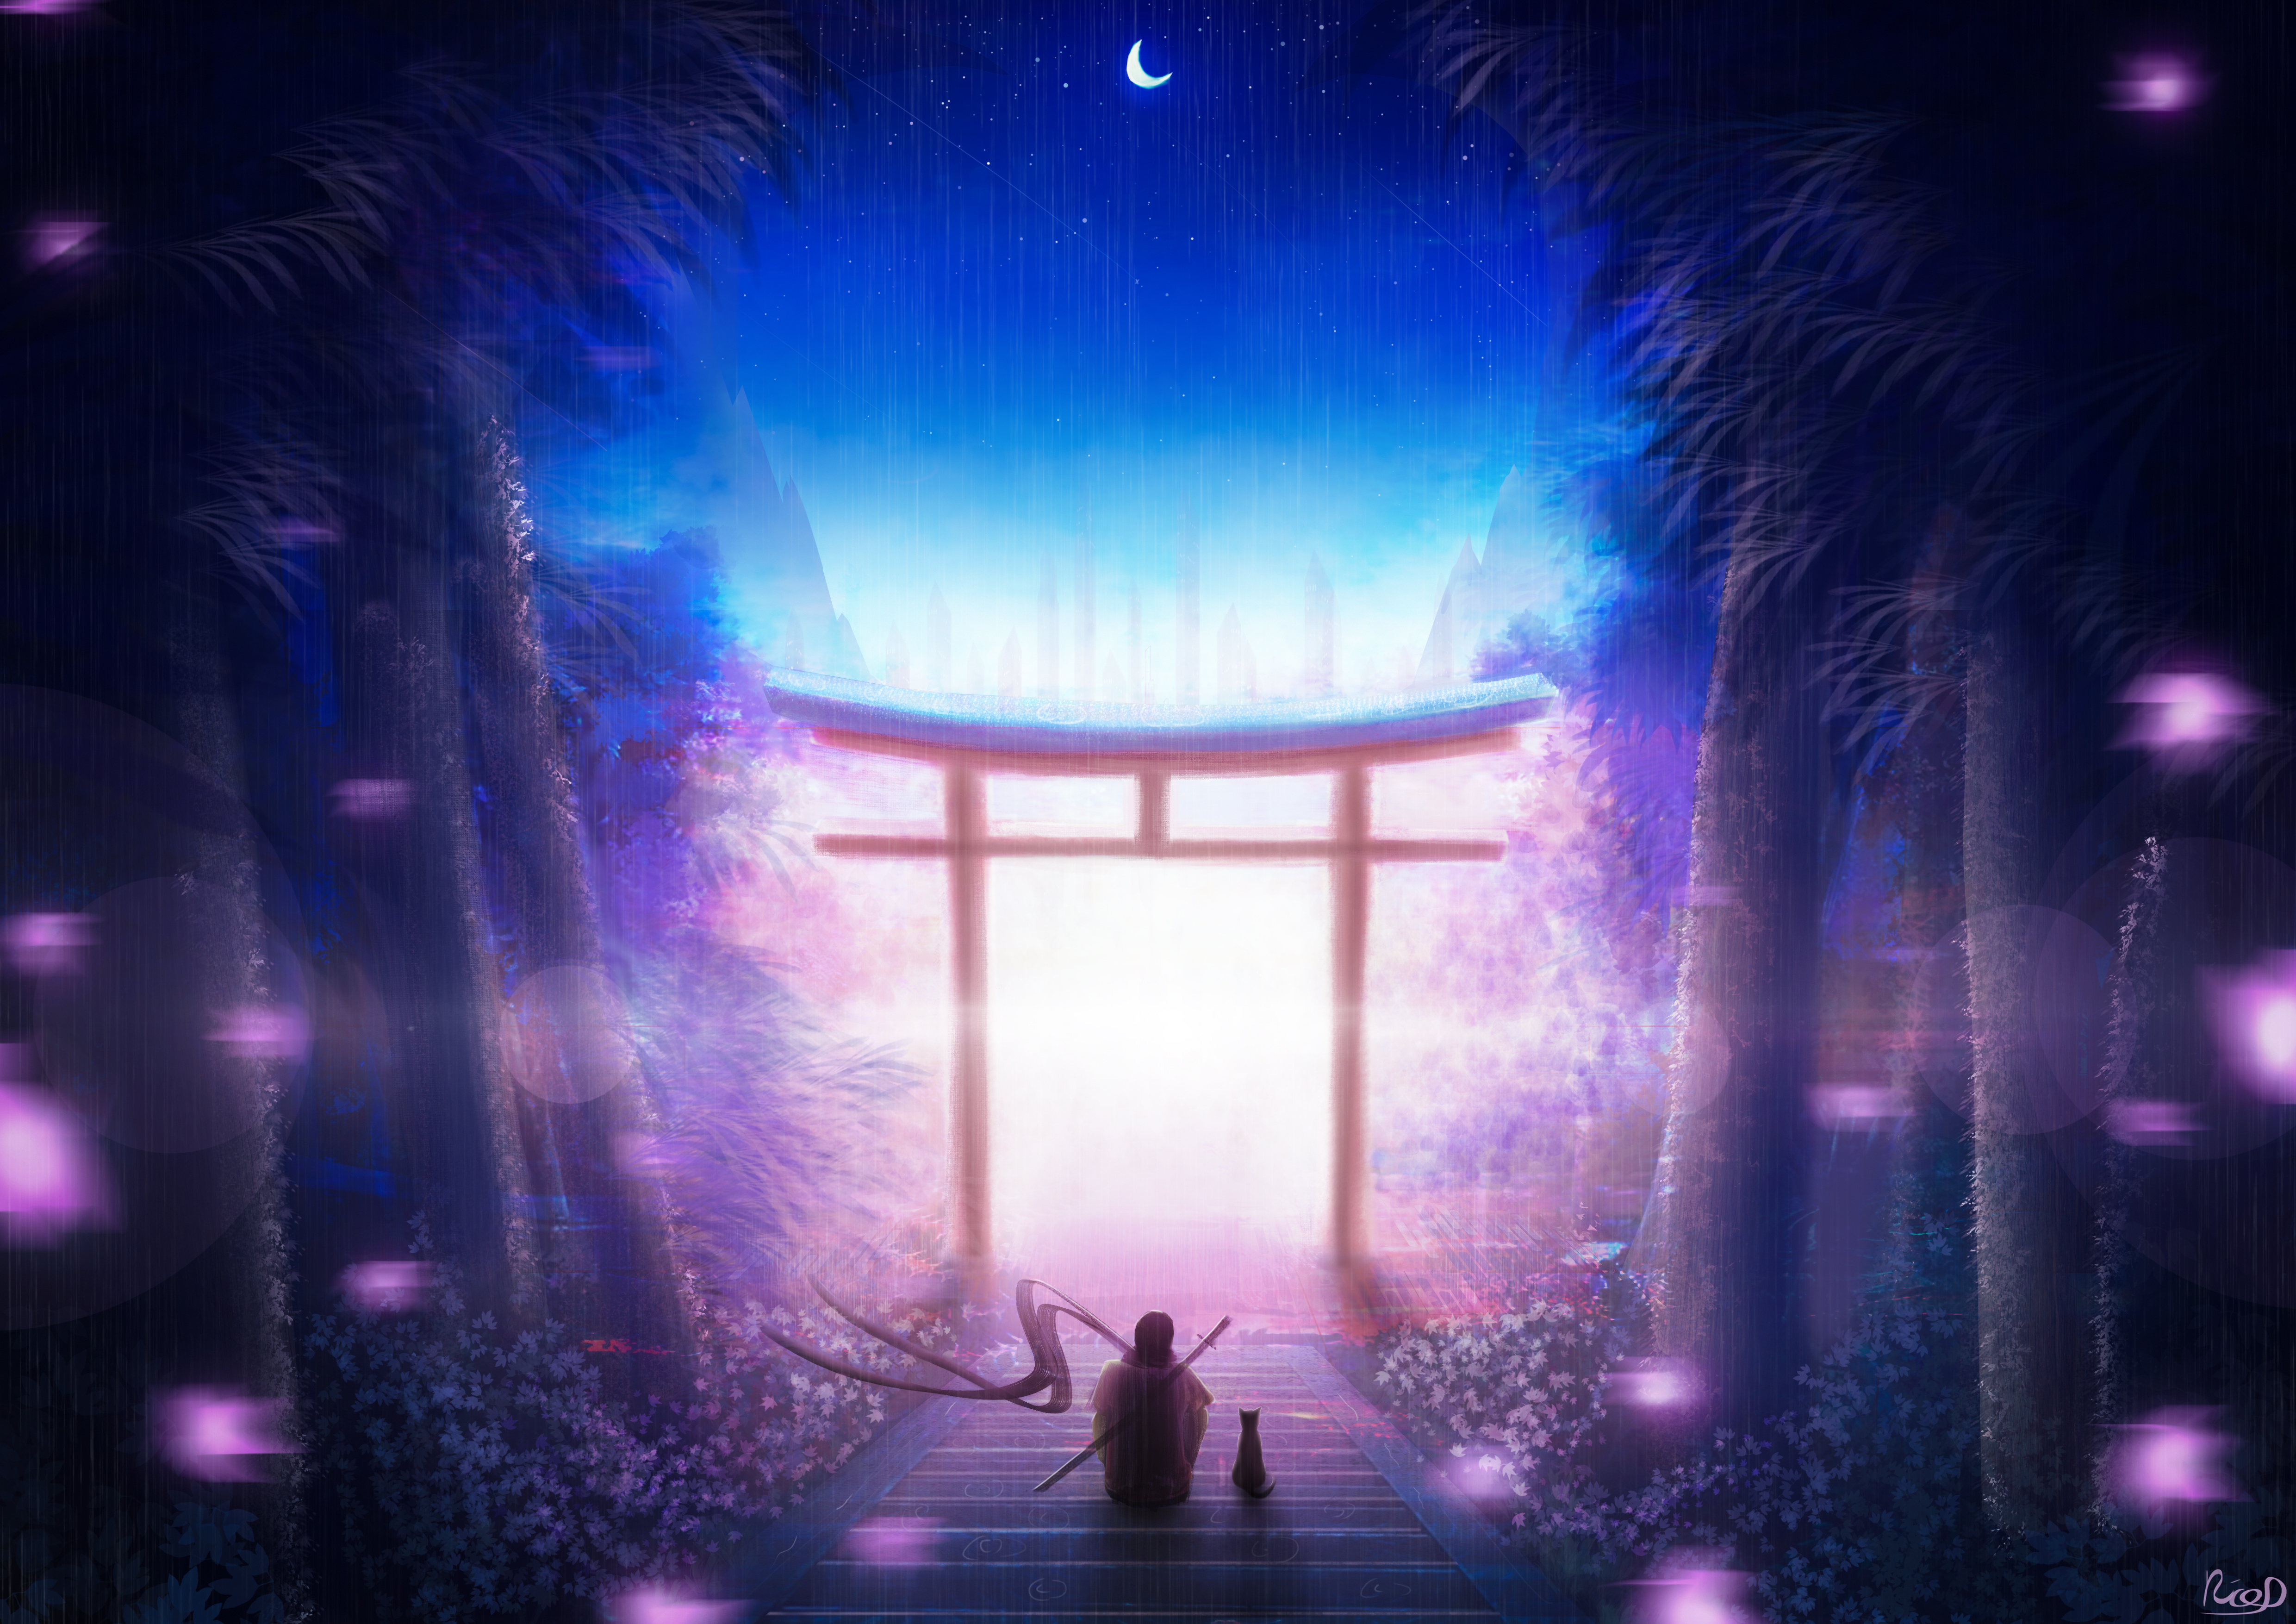 warrior, privacy, art, night, seclusion, torii images